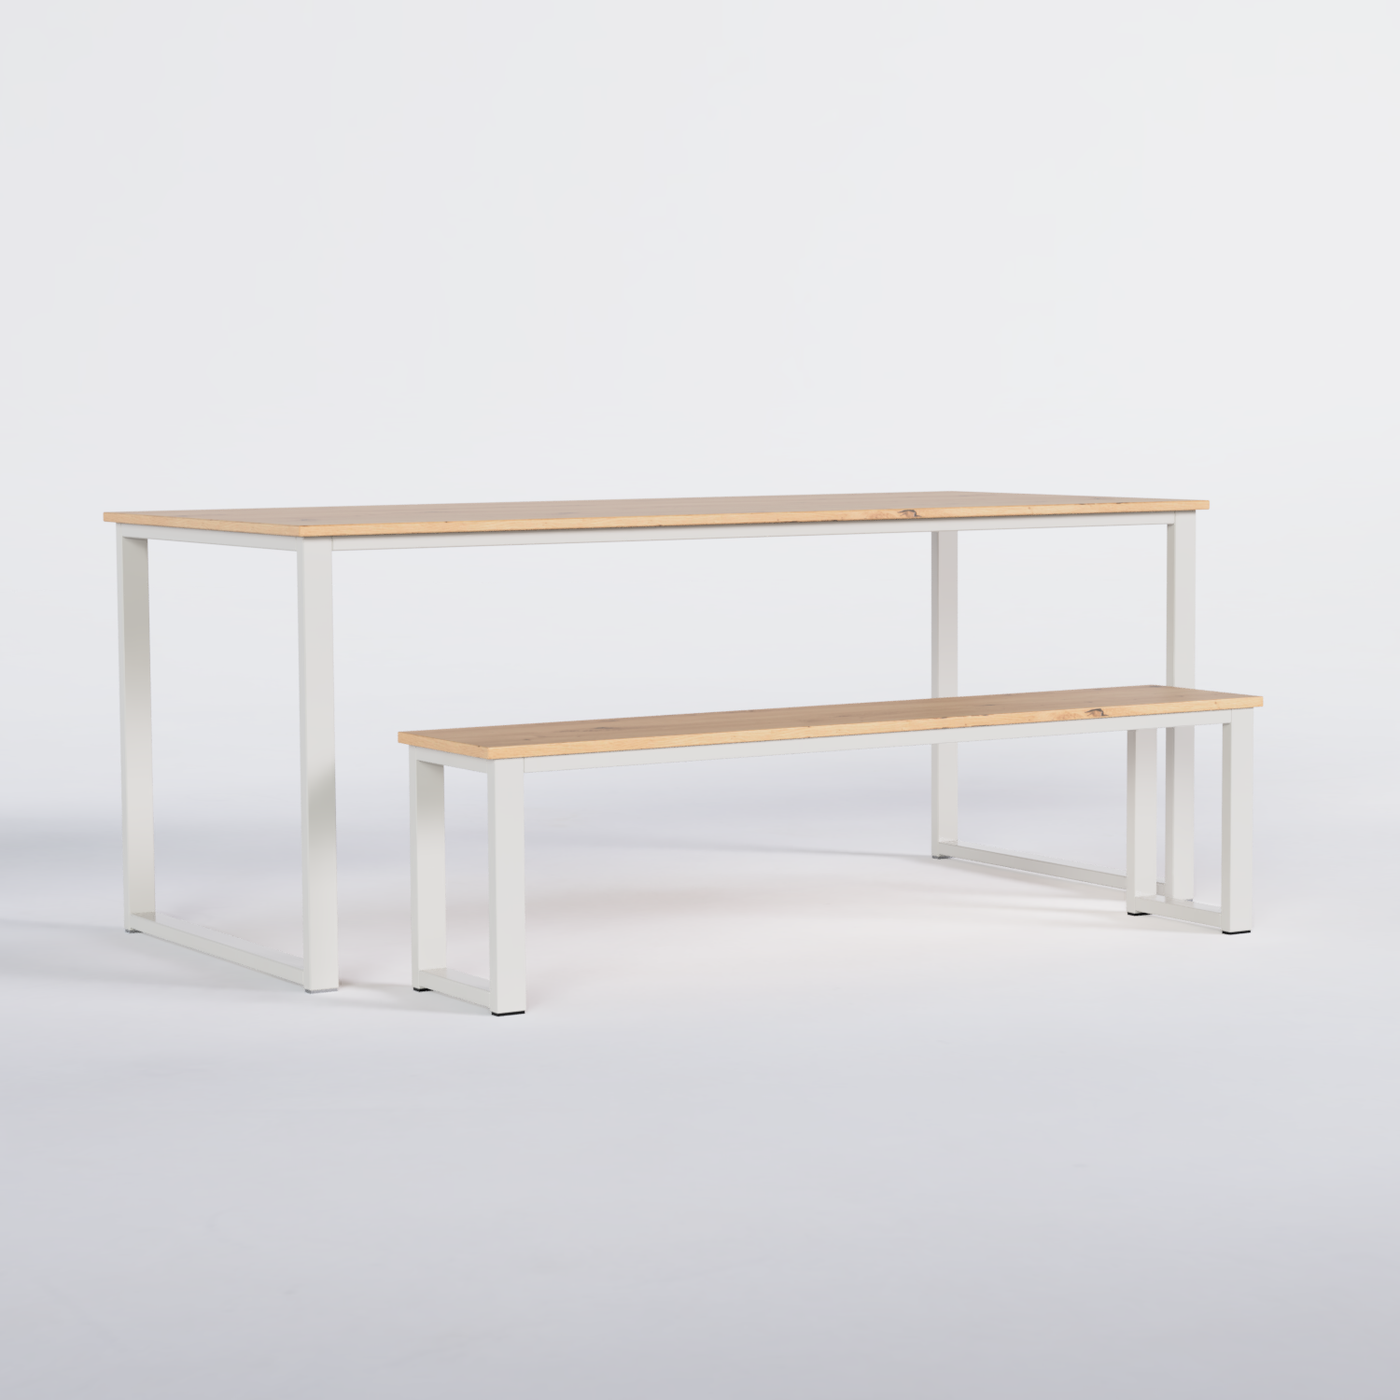 Dining Table Nº 1 - Powder Coated / Solid Oak